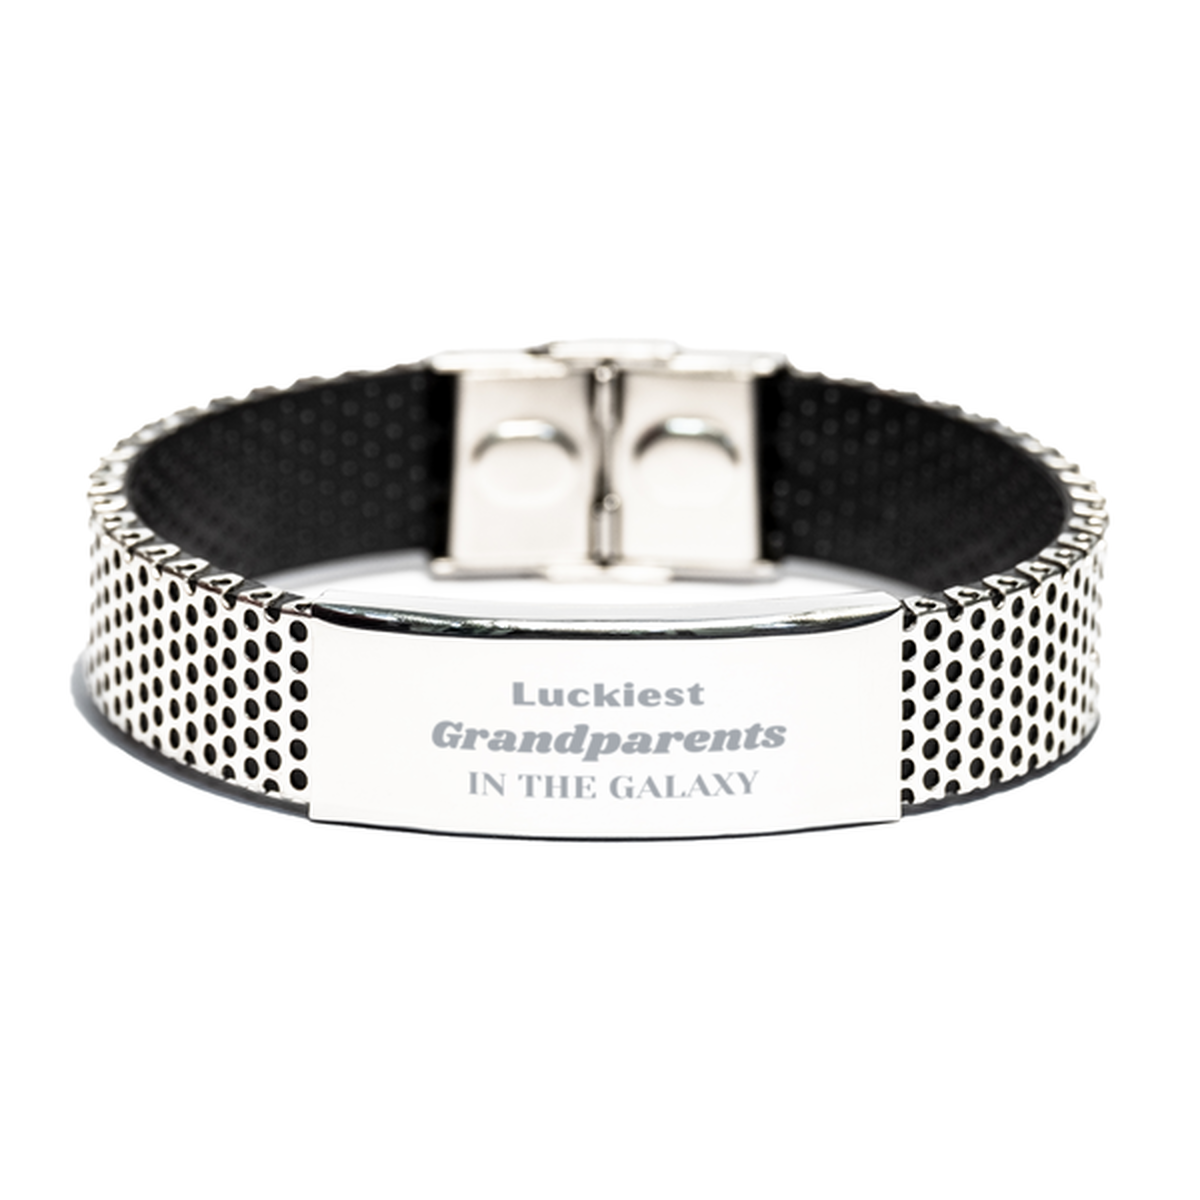 Luckiest Grandparents in the Galaxy, To My Grandparents Engraved Gifts, Christmas Grandparents Stainless Steel Bracelet Gifts, X-mas Birthday Unique Gifts For Grandparents Men Women